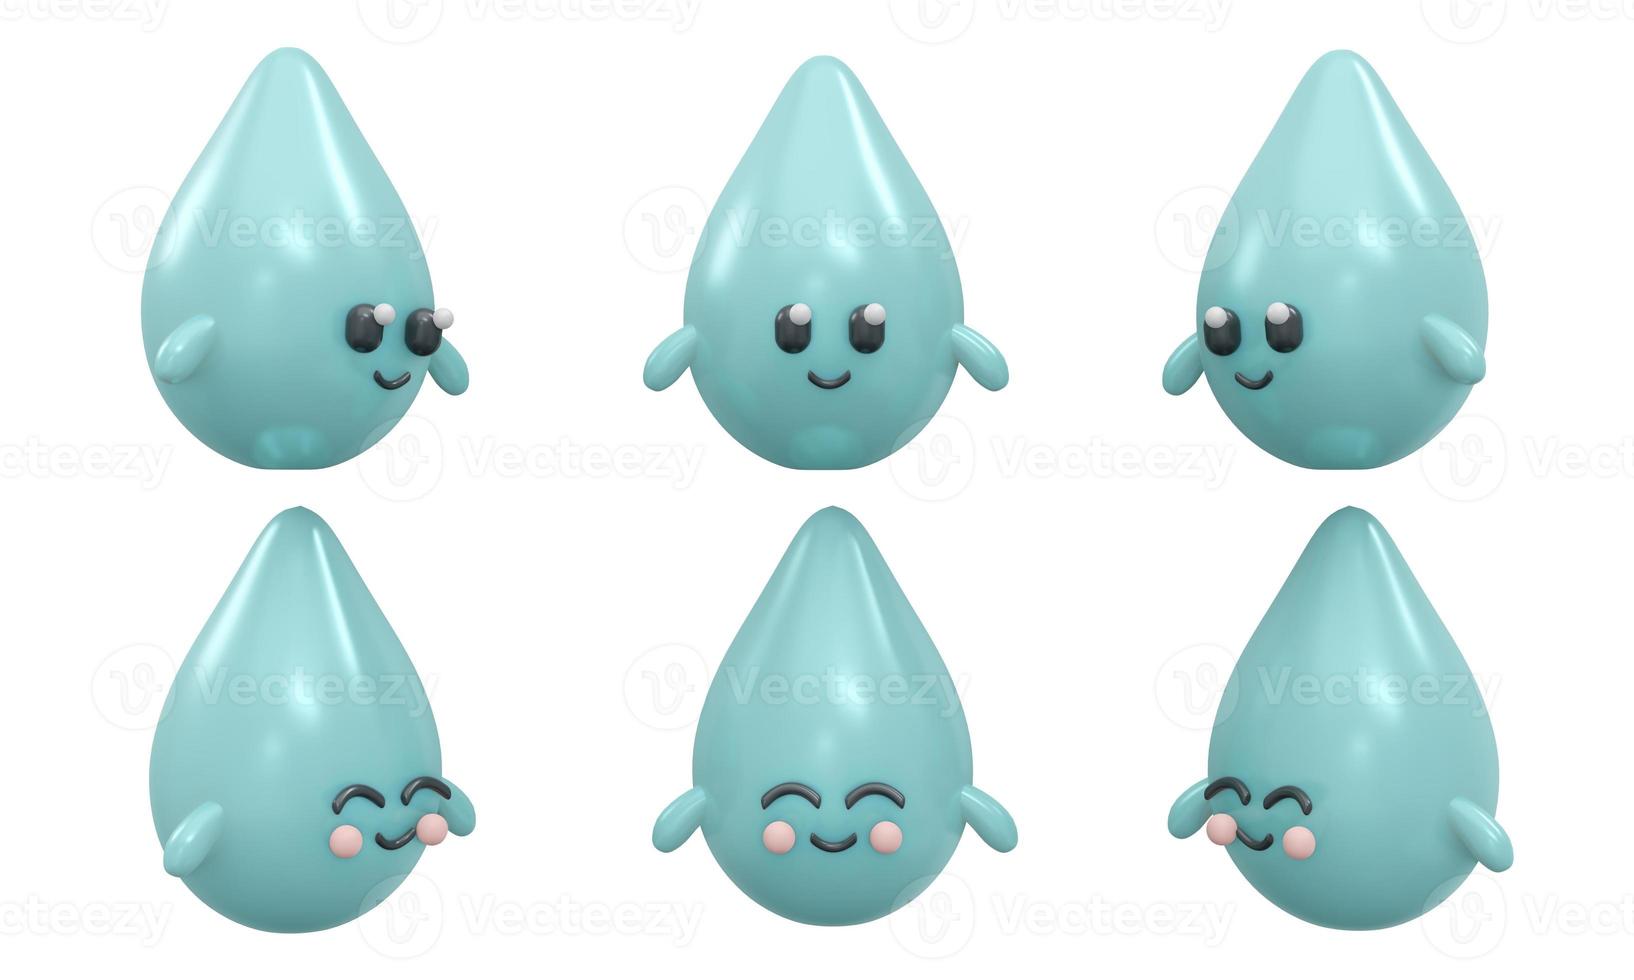 3D Rendering of character of smiley water drop isolate on white background concept of world water day. 3D Render illustration cartoon style. photo